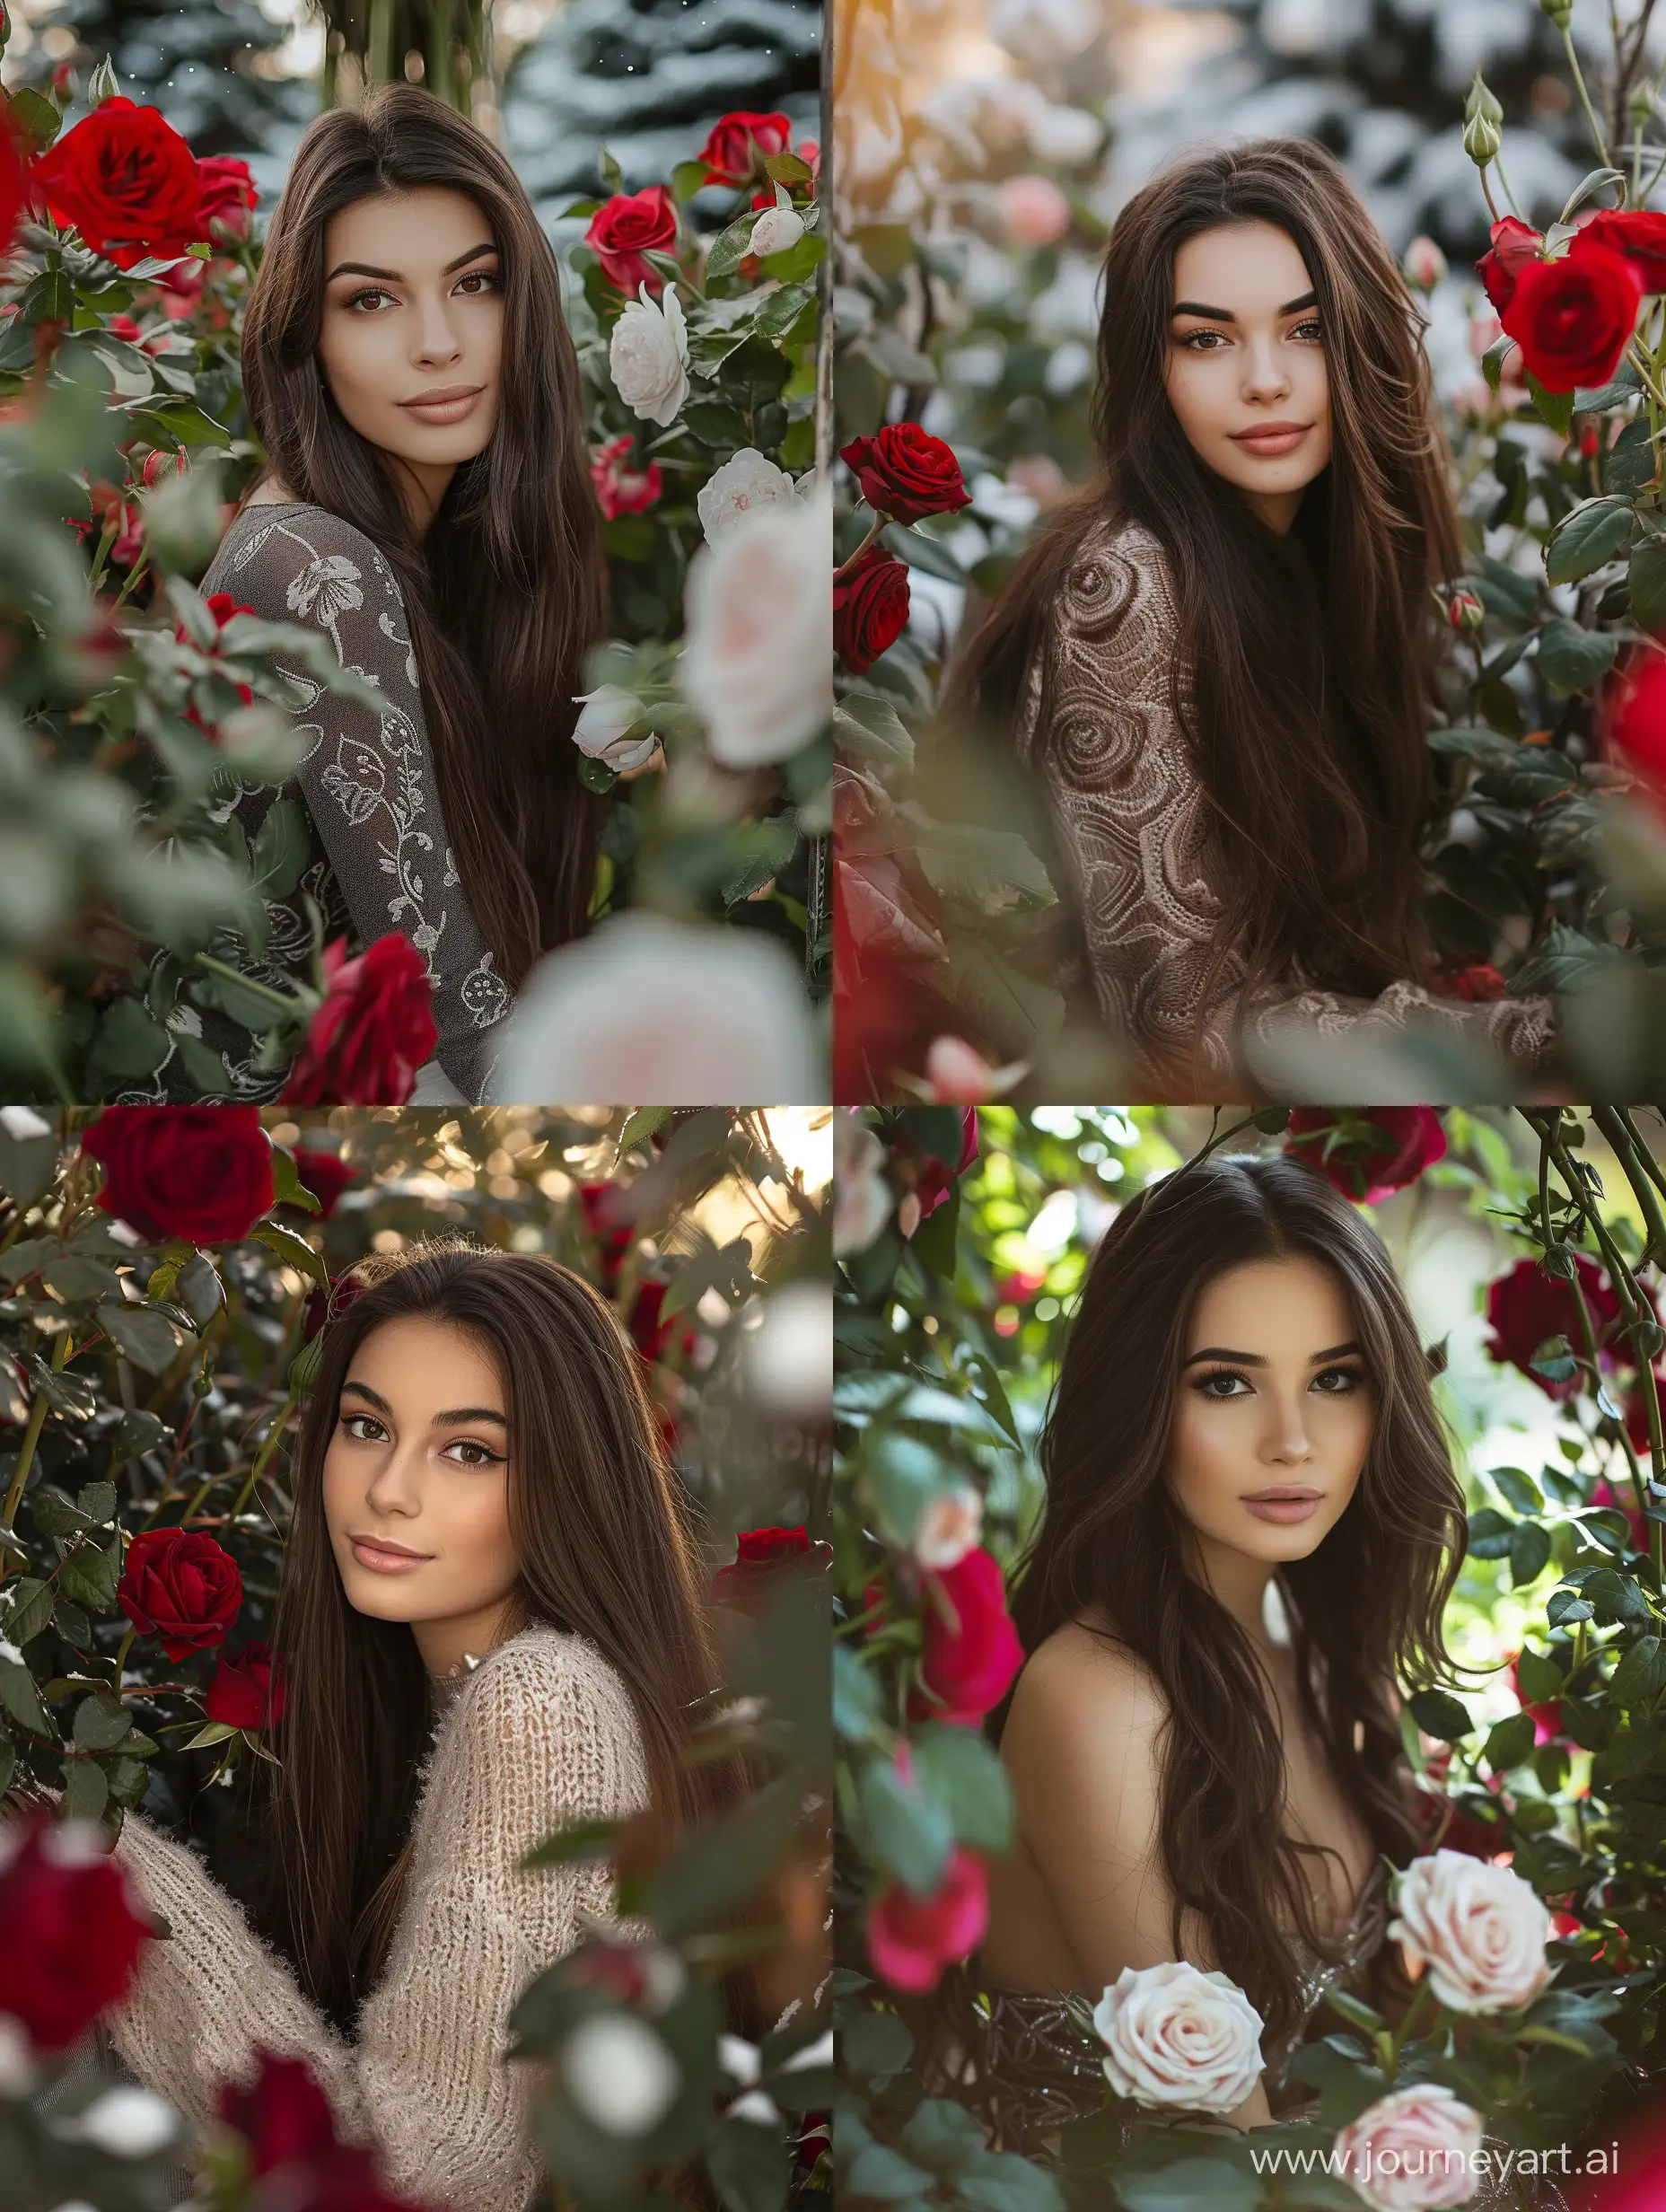 Romantic-Valentines-Day-Portrait-Elegant-Woman-Surrounded-by-Roses-in-Winter-Garden